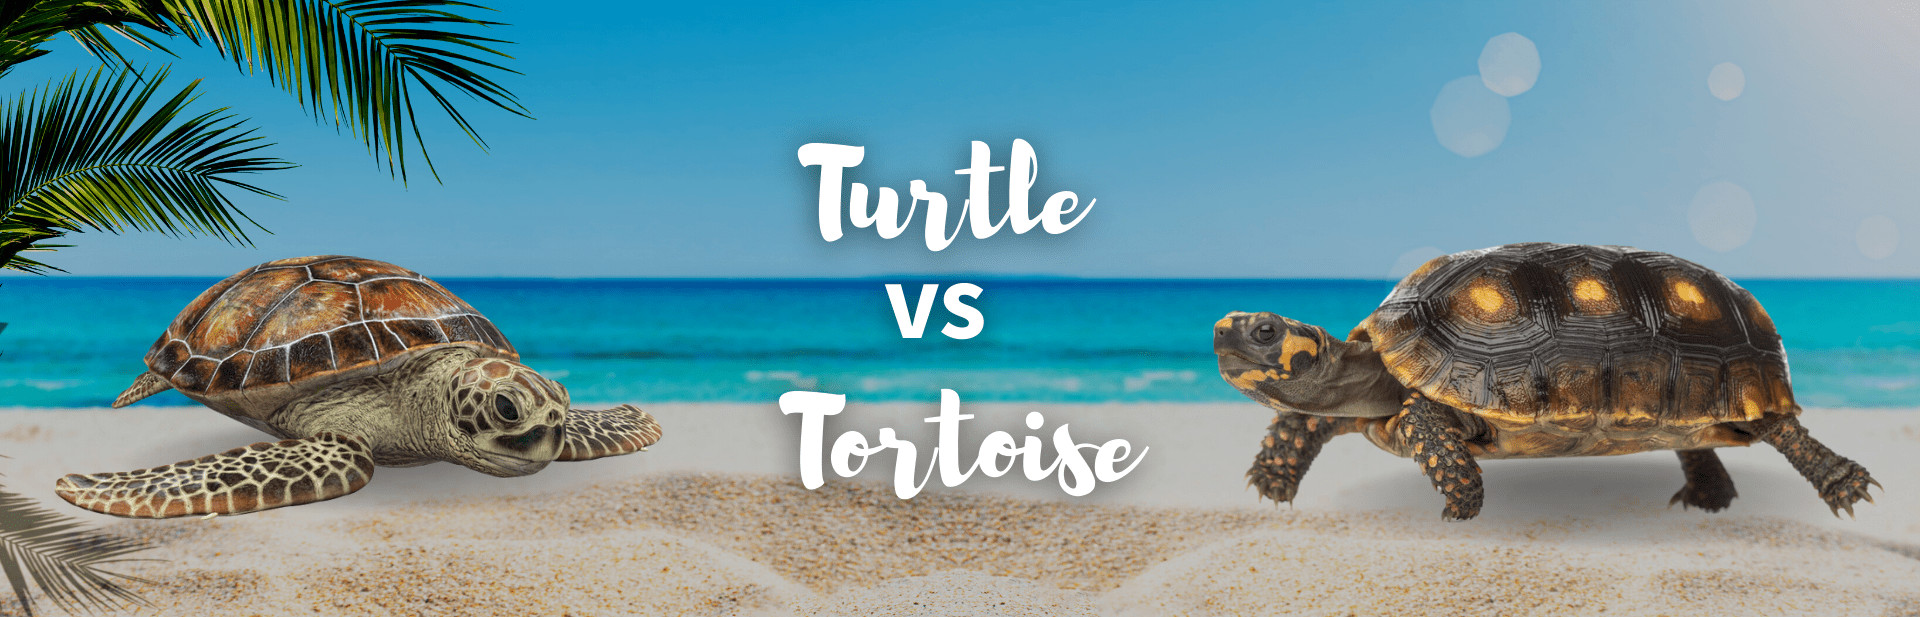 Turtle vs Tortoise: 7 Key Differences Detailed with Images and Facts